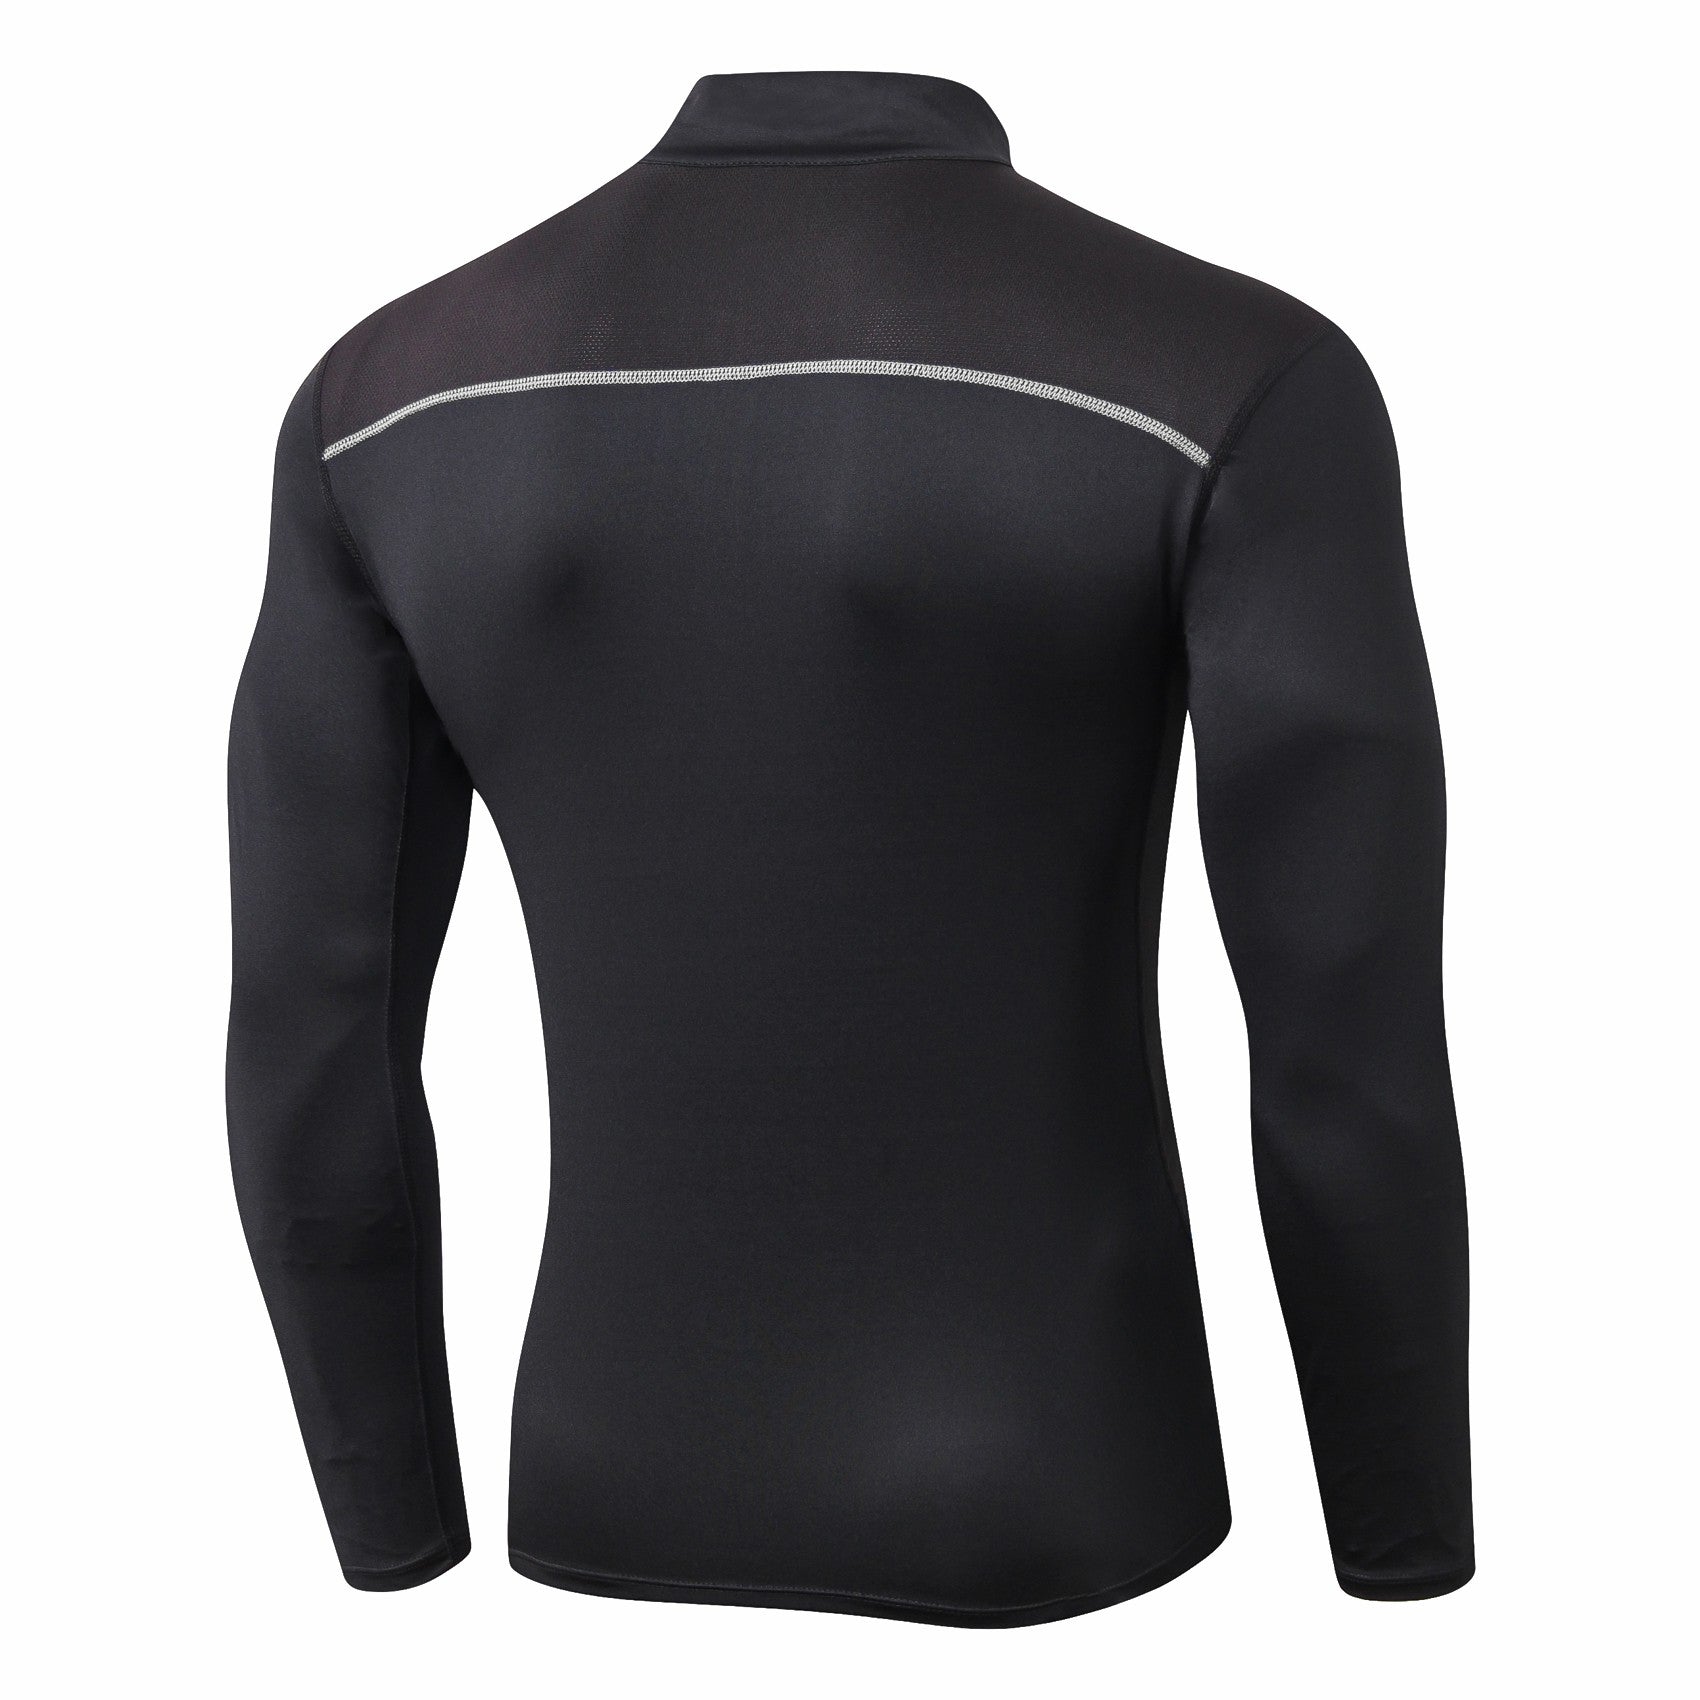 Men Workout Compression Shirts 1/4 Zip Pullover Long Sleeve